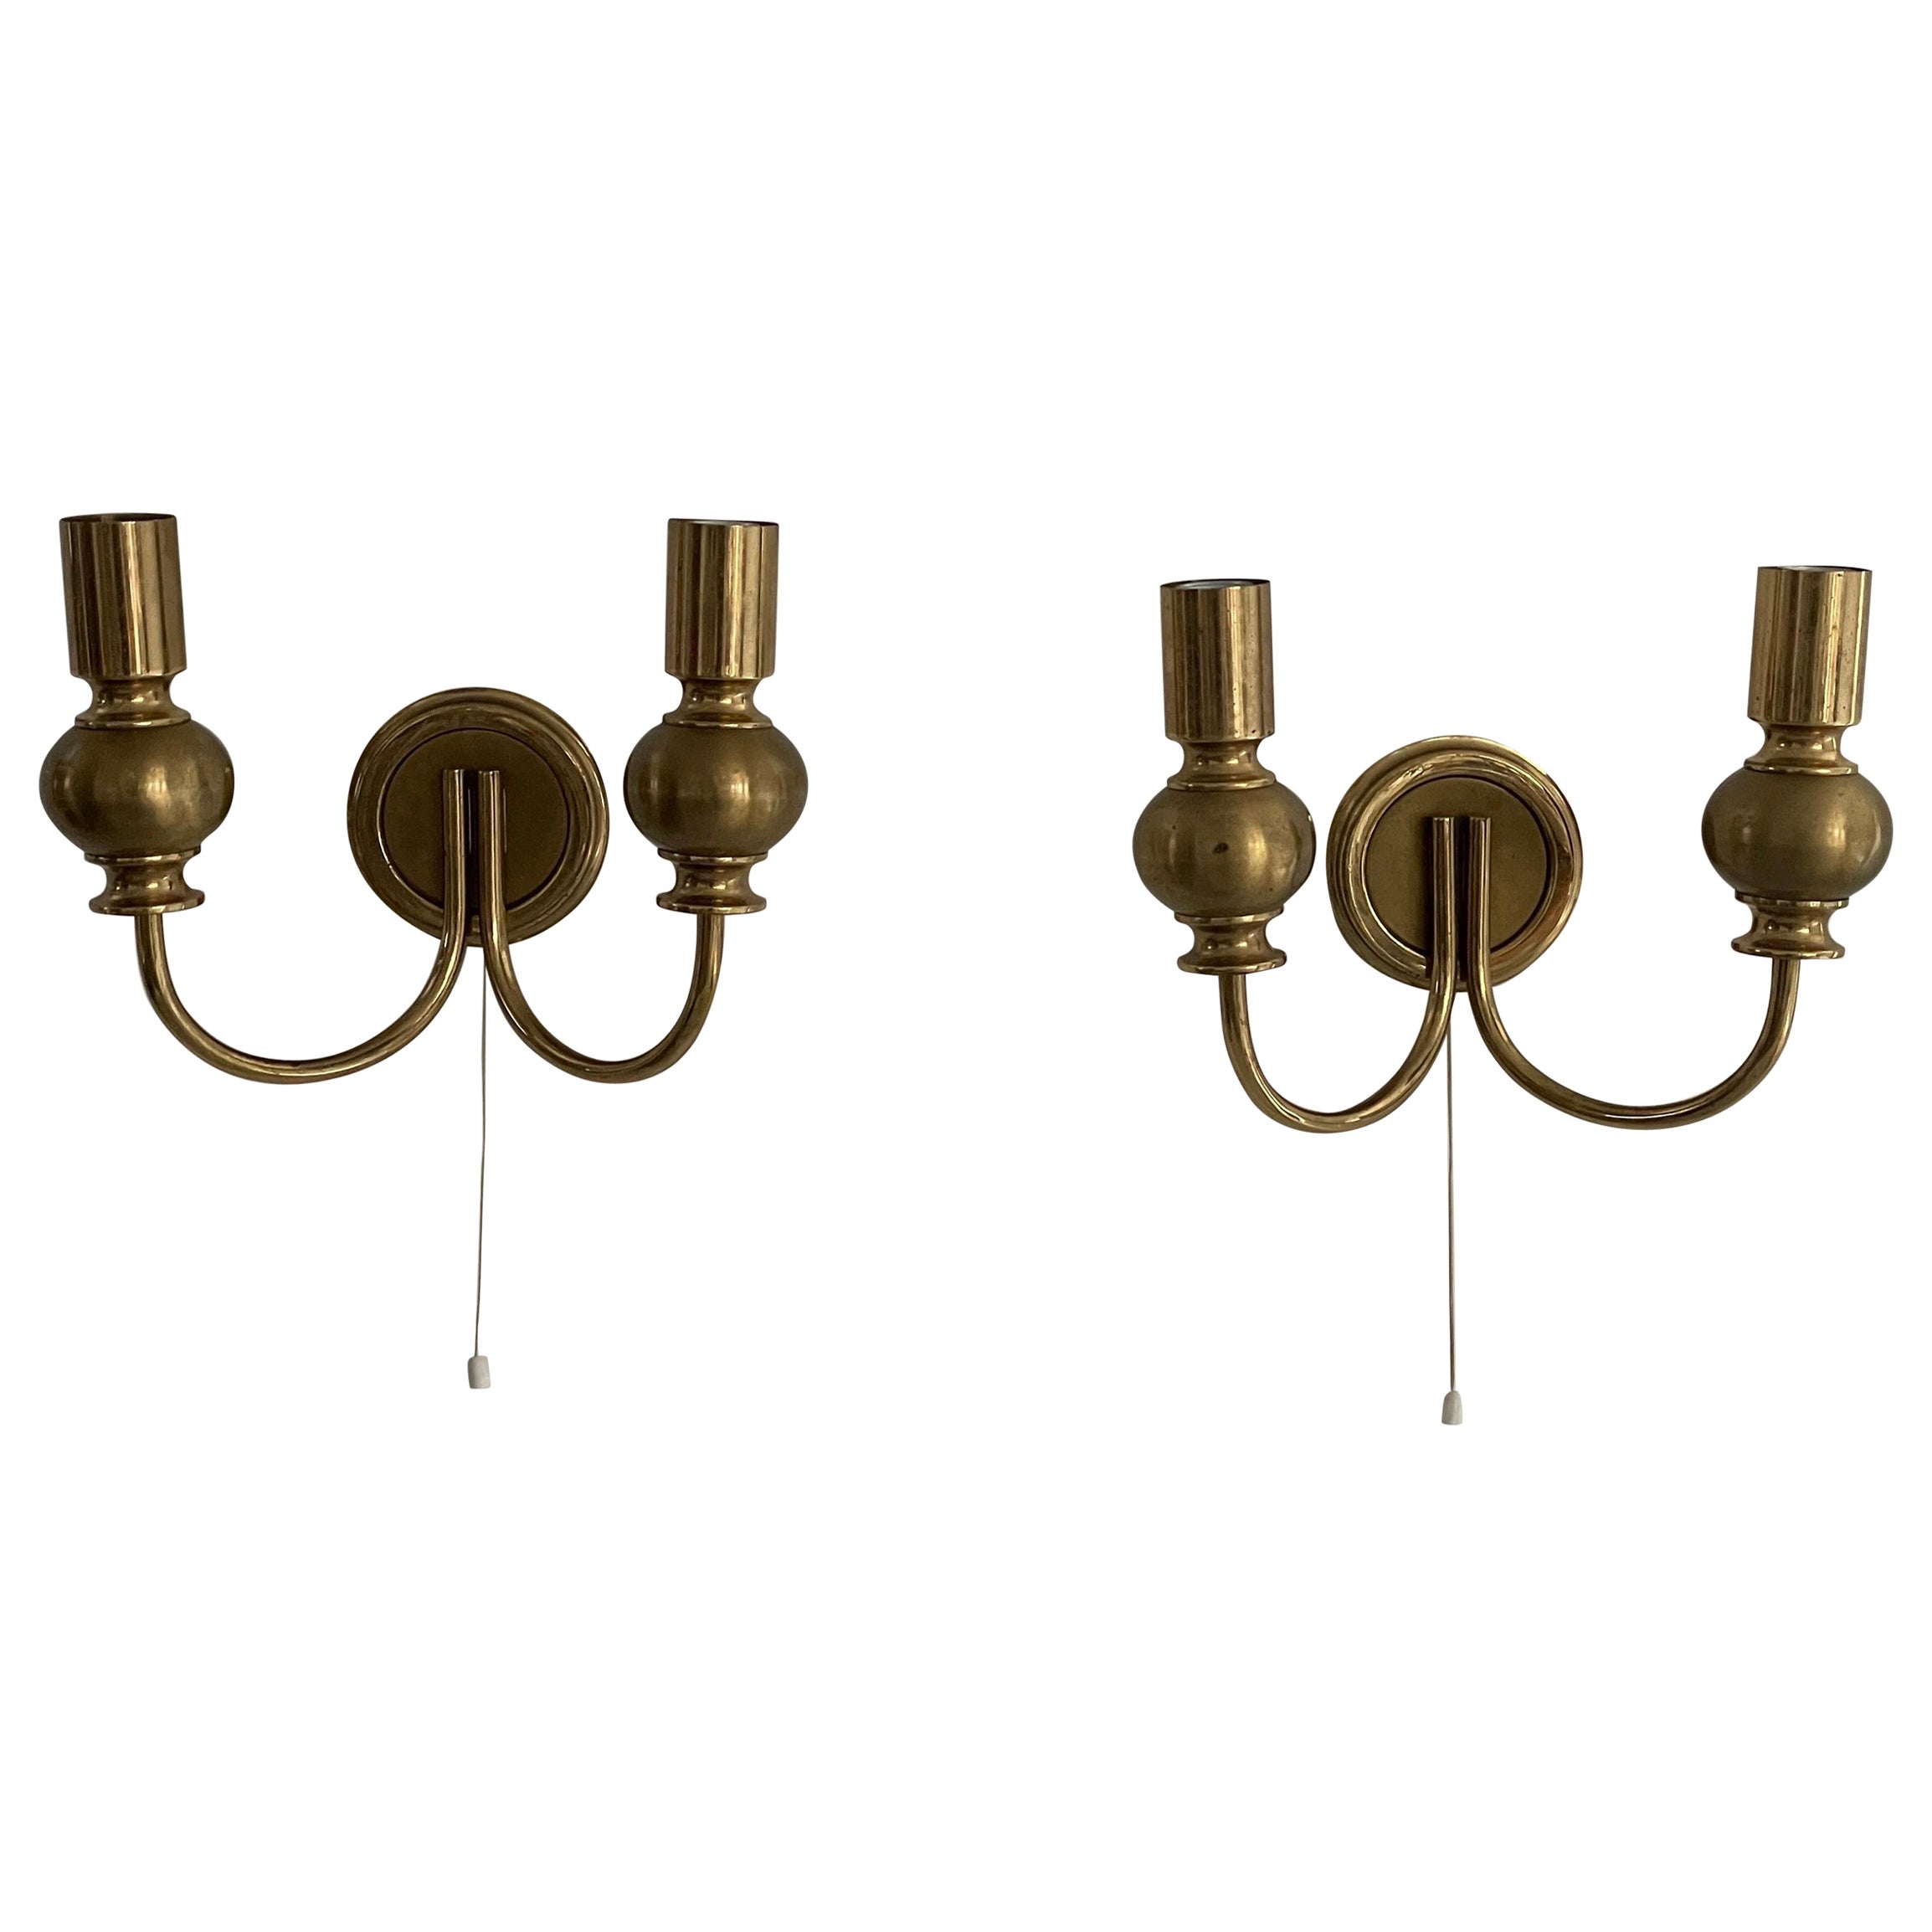 Atomic Design Brass Pair of Sconces by N Leuchten, 1950s, Germany For Sale